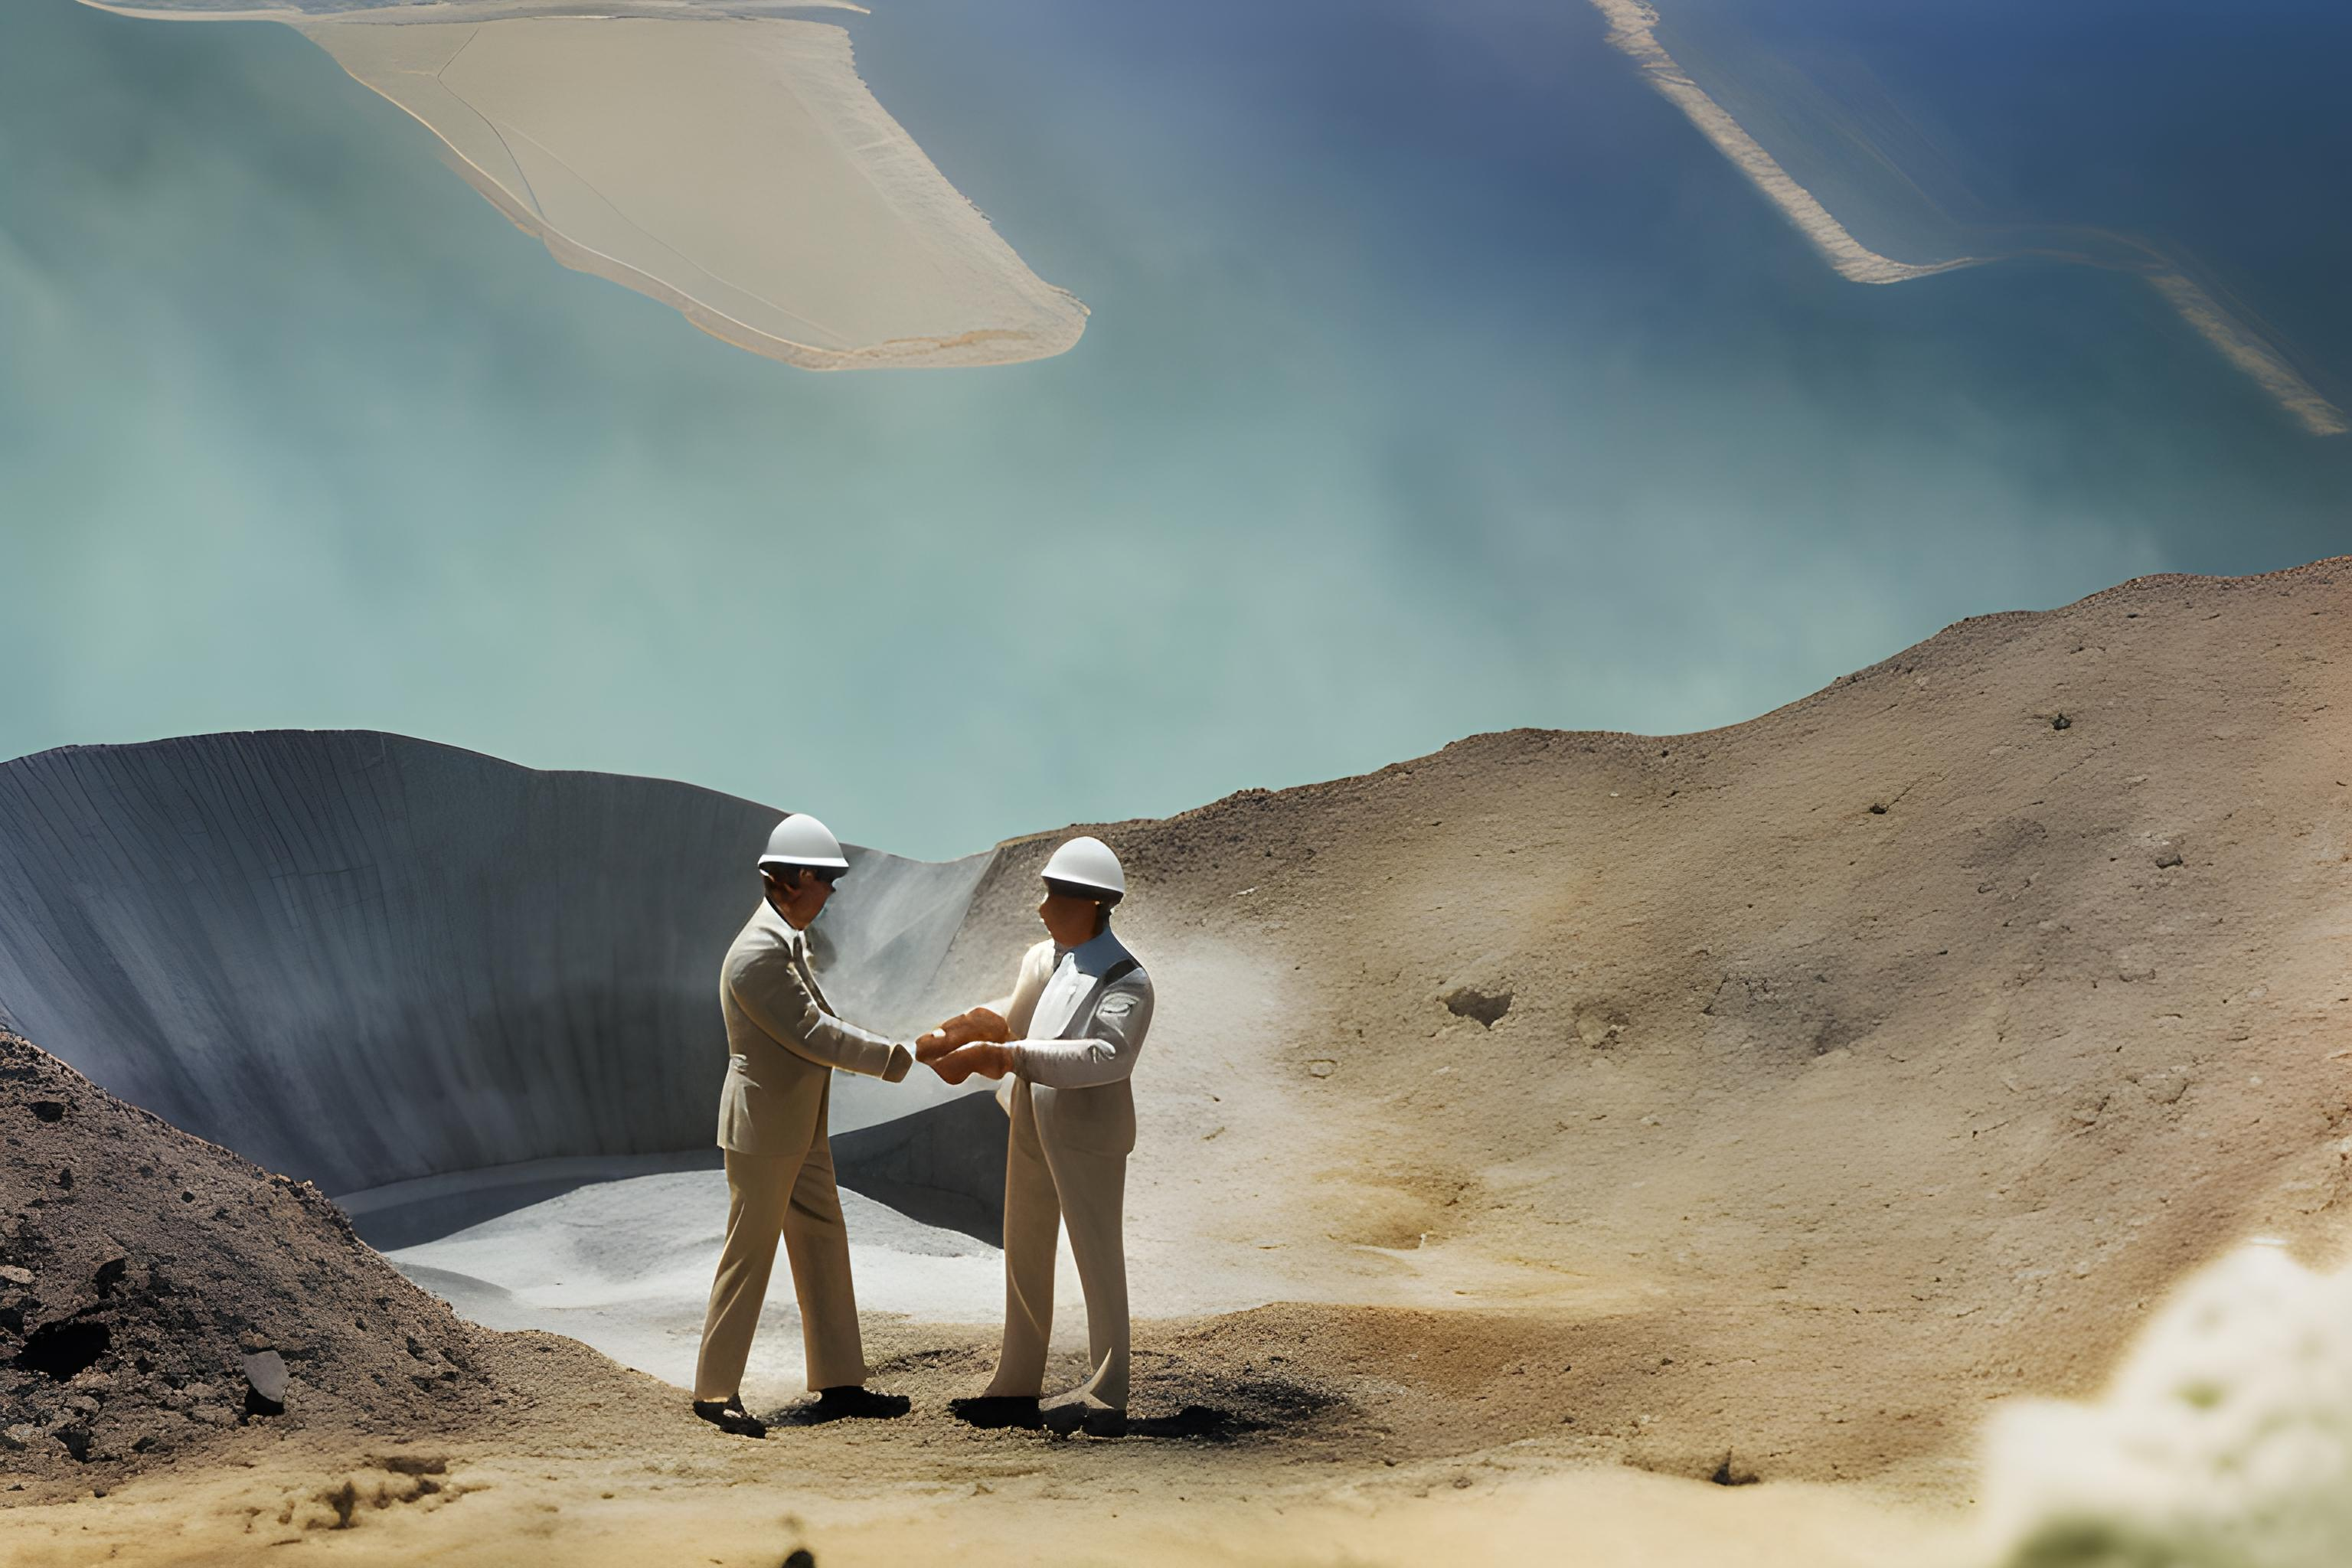 Two men stand in a construction aggregate quarry shaking hands.